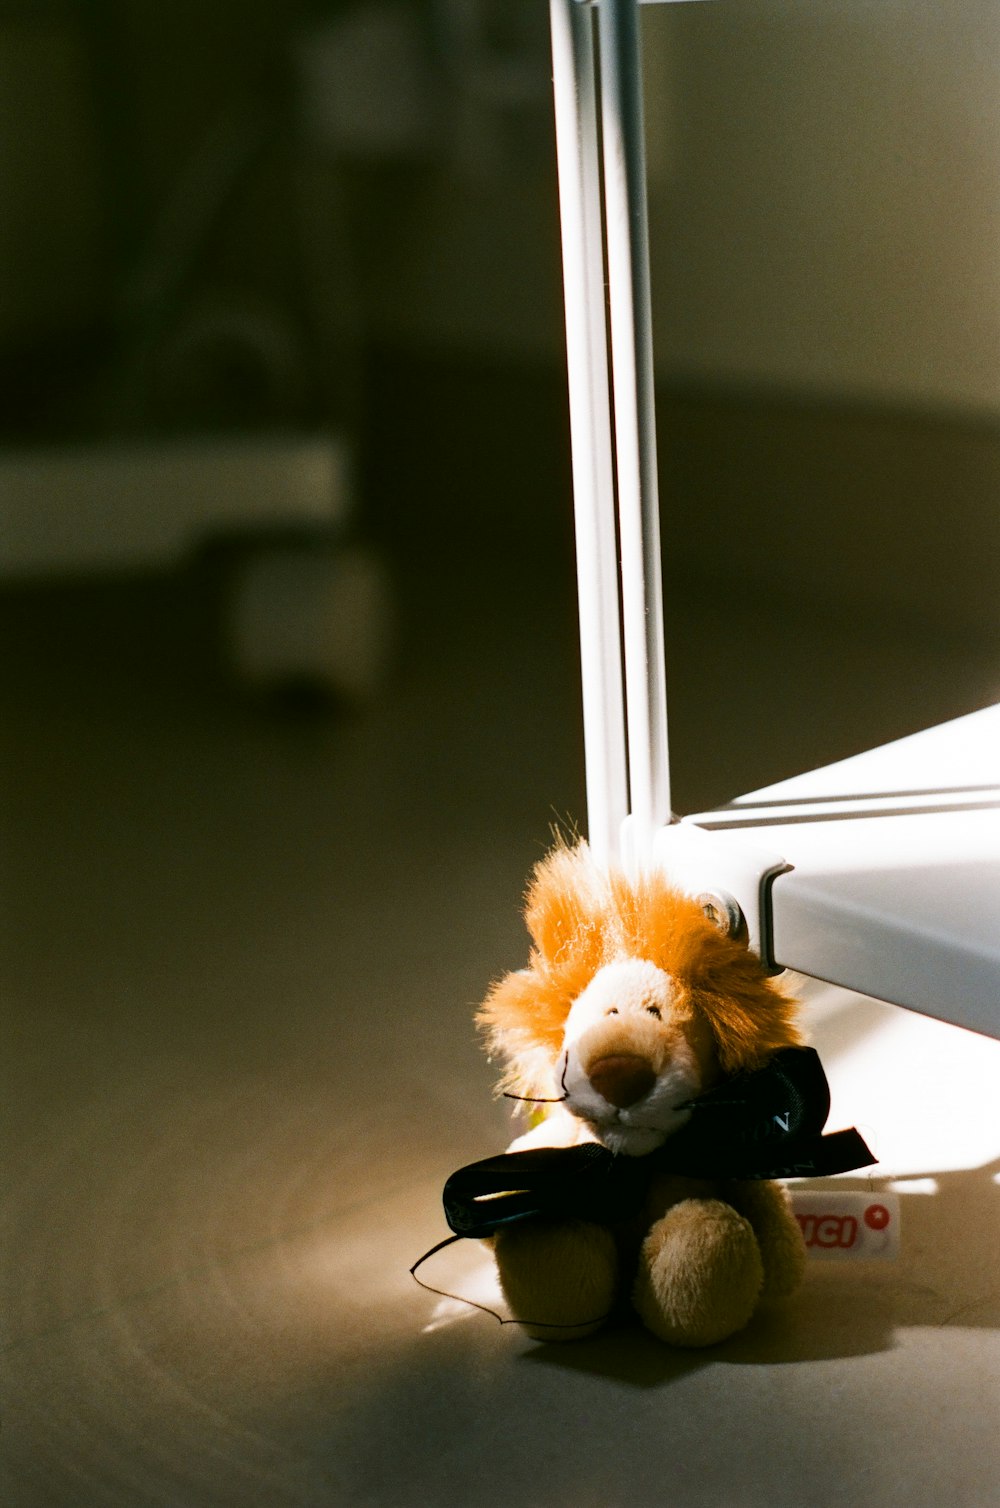 a stuffed animal sitting on the floor in front of a mirror